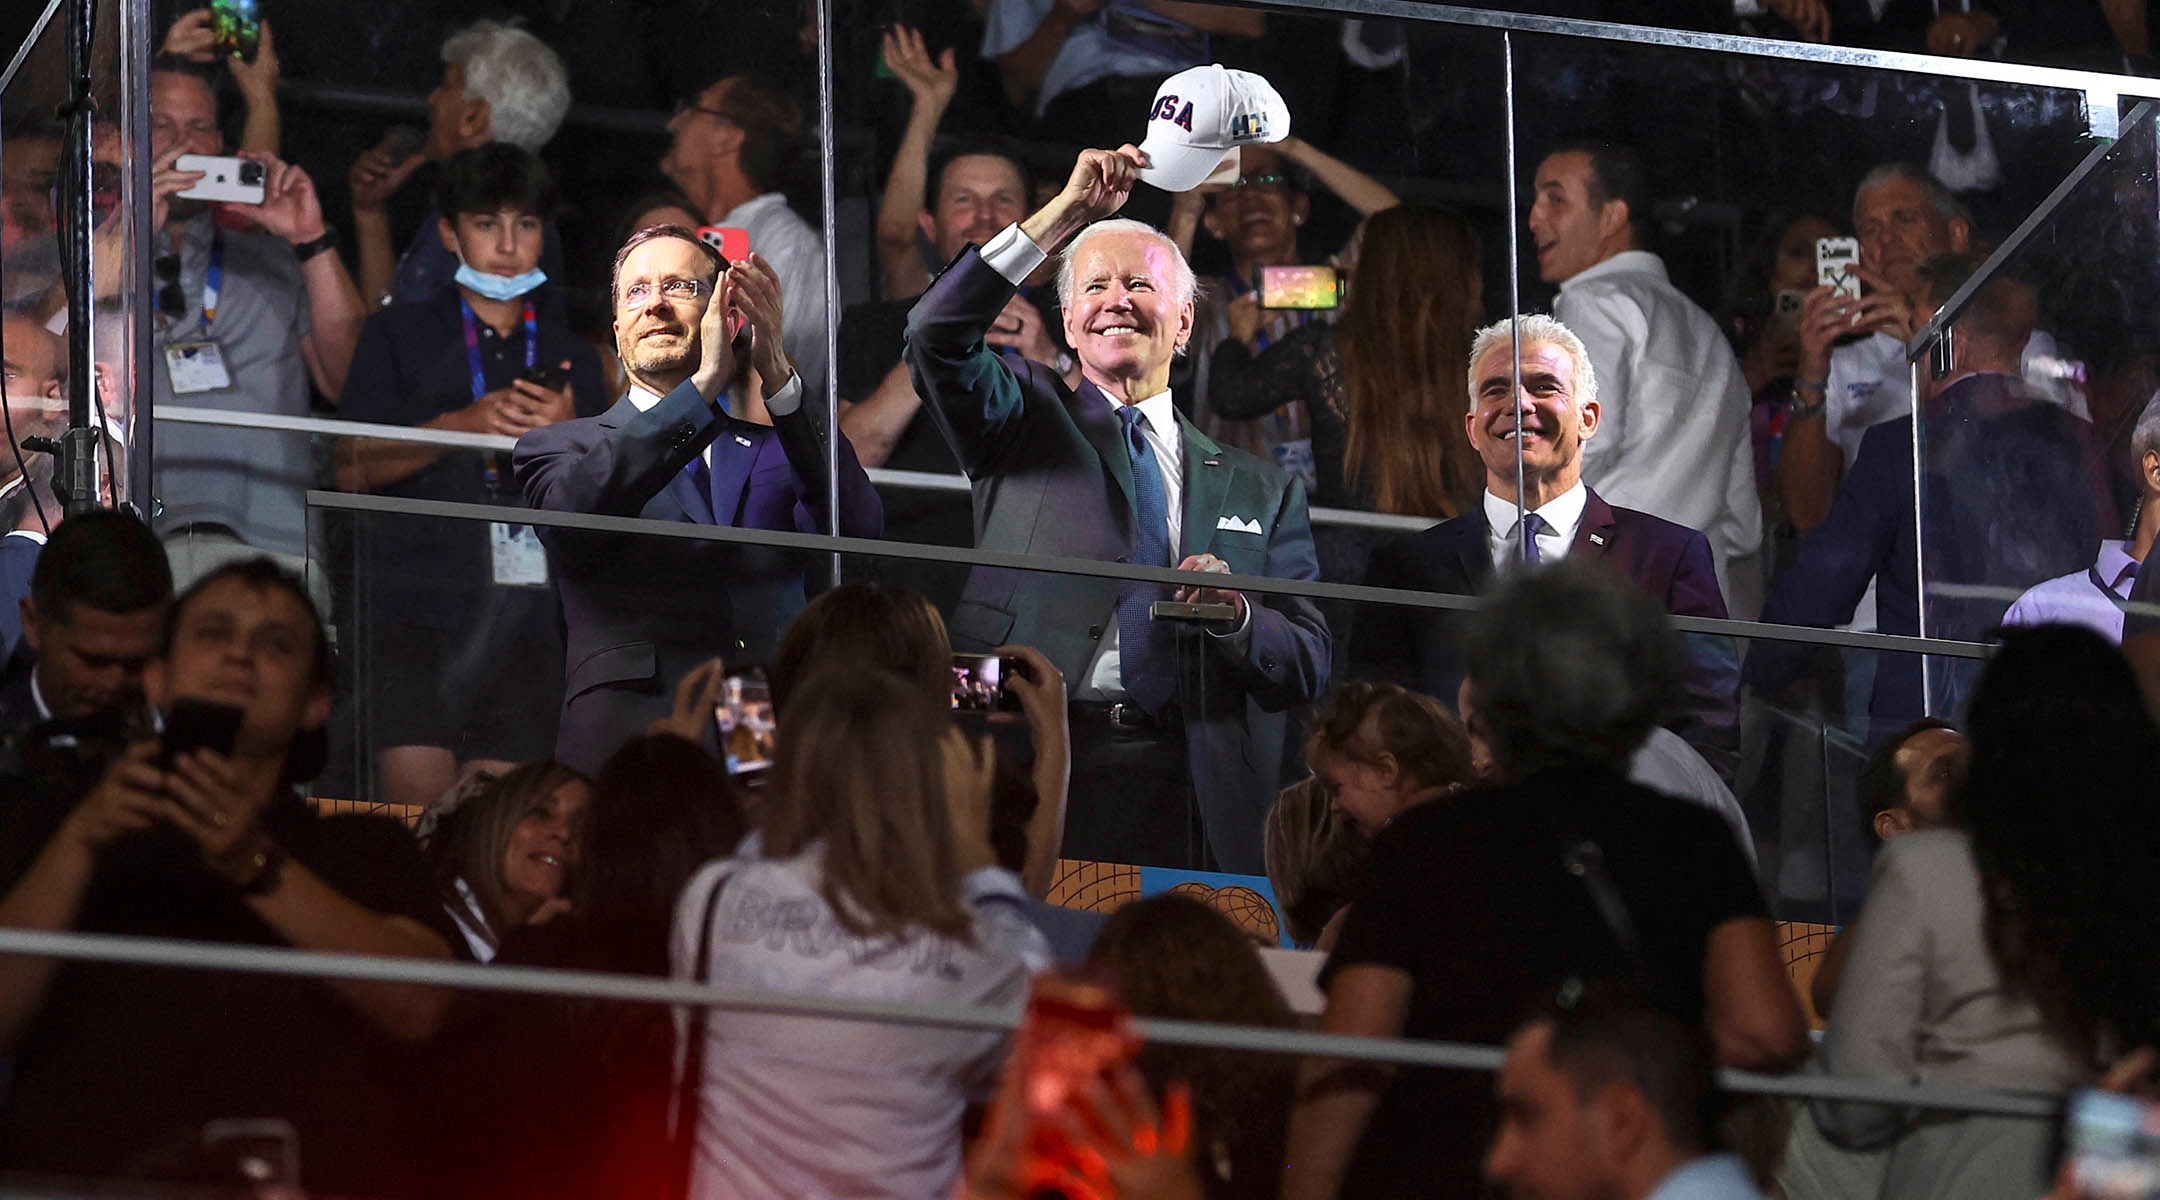 Israeli President Isaac Herzog, President Joe Biden, and Israel’s caretaker Prime Minister Yair Lapid applaud and cheer as they attend the opening ceremony of the Maccabiah Games at Teddy Stadium in Jerusalem, July 14, 2022. (Ronen Zvulun/POOL/AFP via Getty Images)